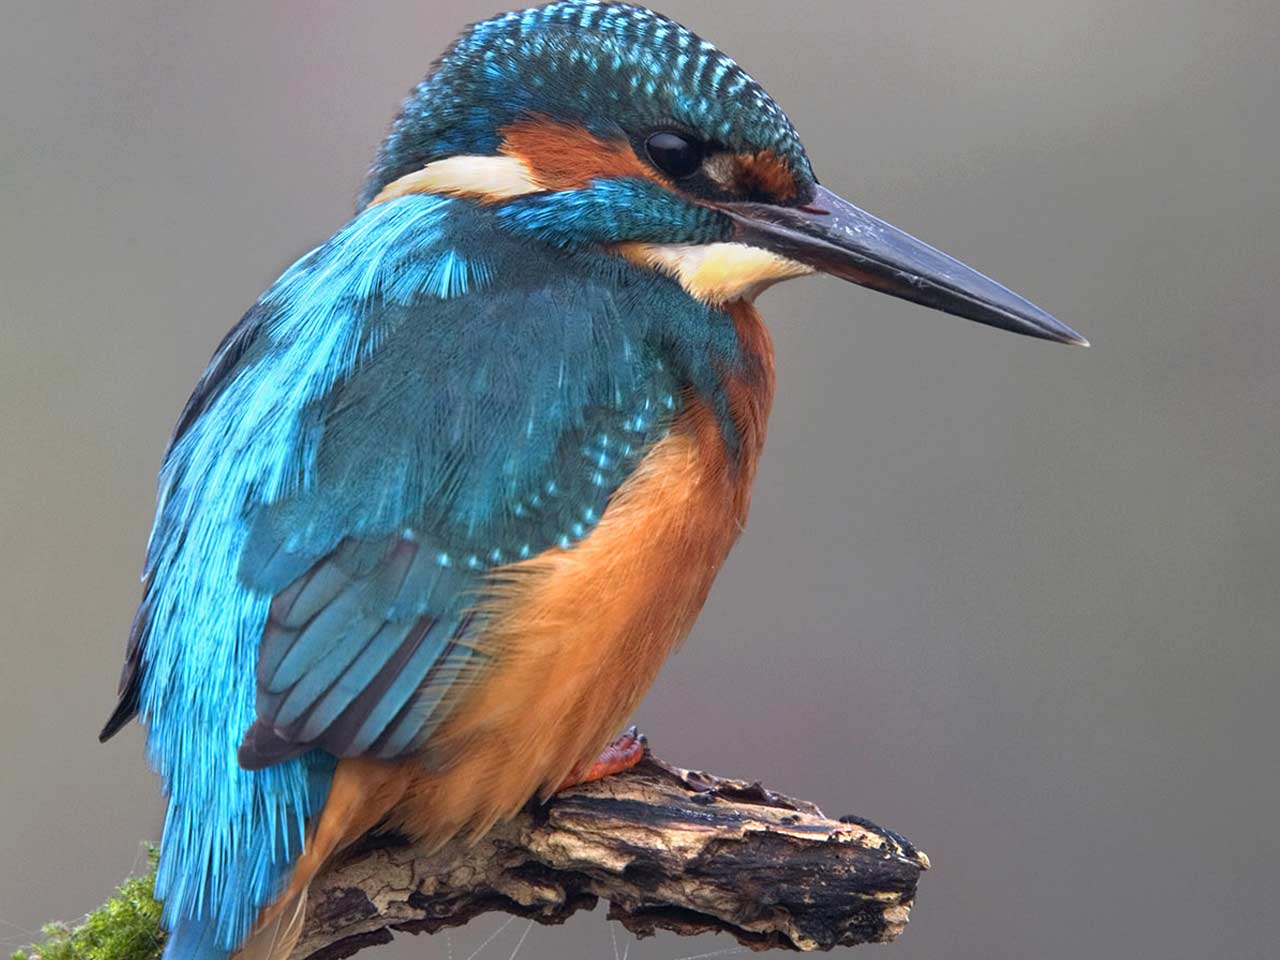 The kingfisher photographed by David Chapman